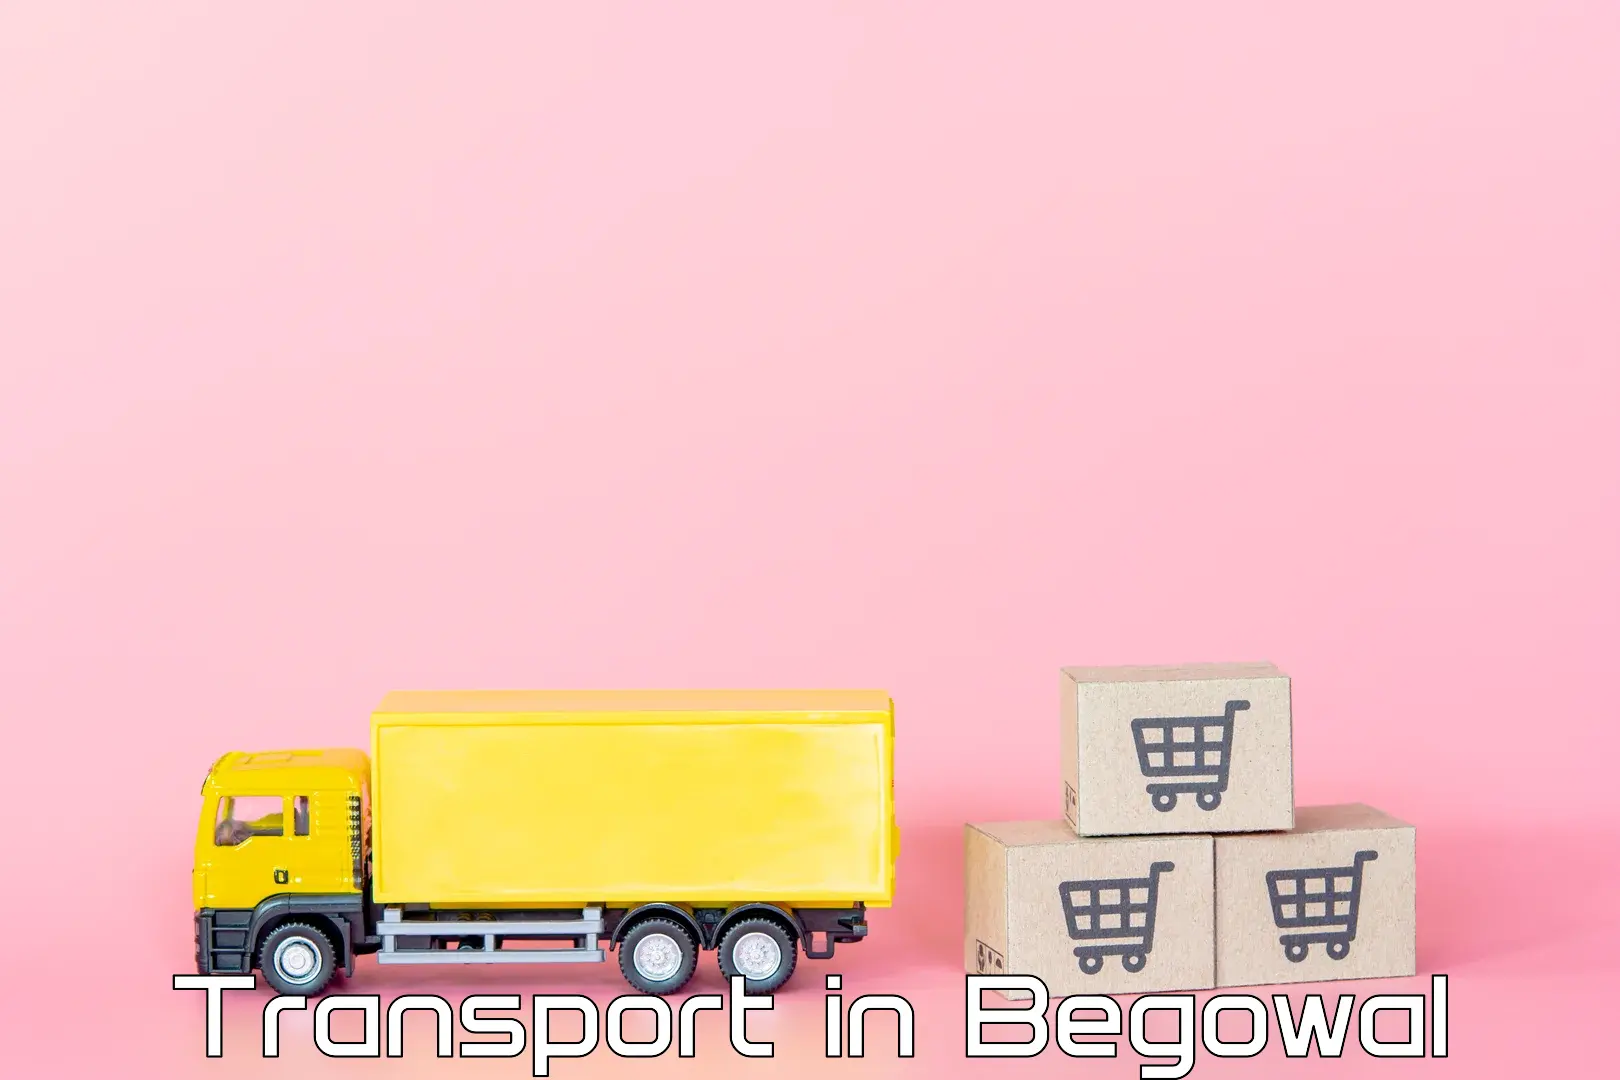 Vehicle transport services in Begowal